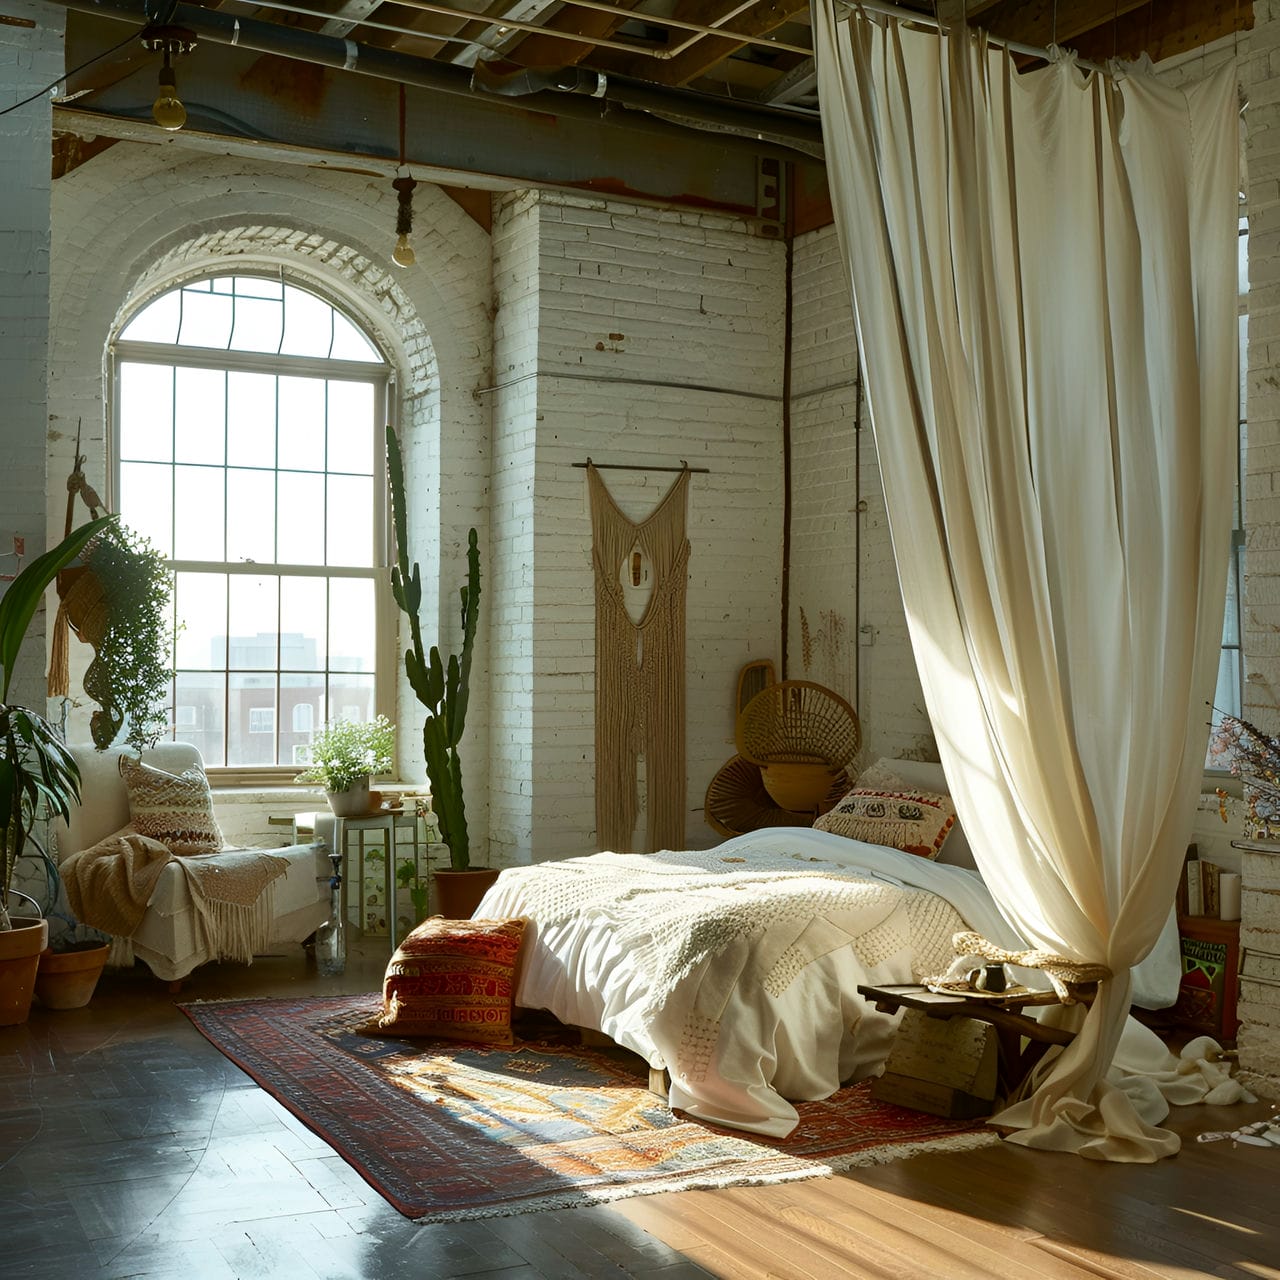 Loft: size, functionality, uses, furniture, and renovation